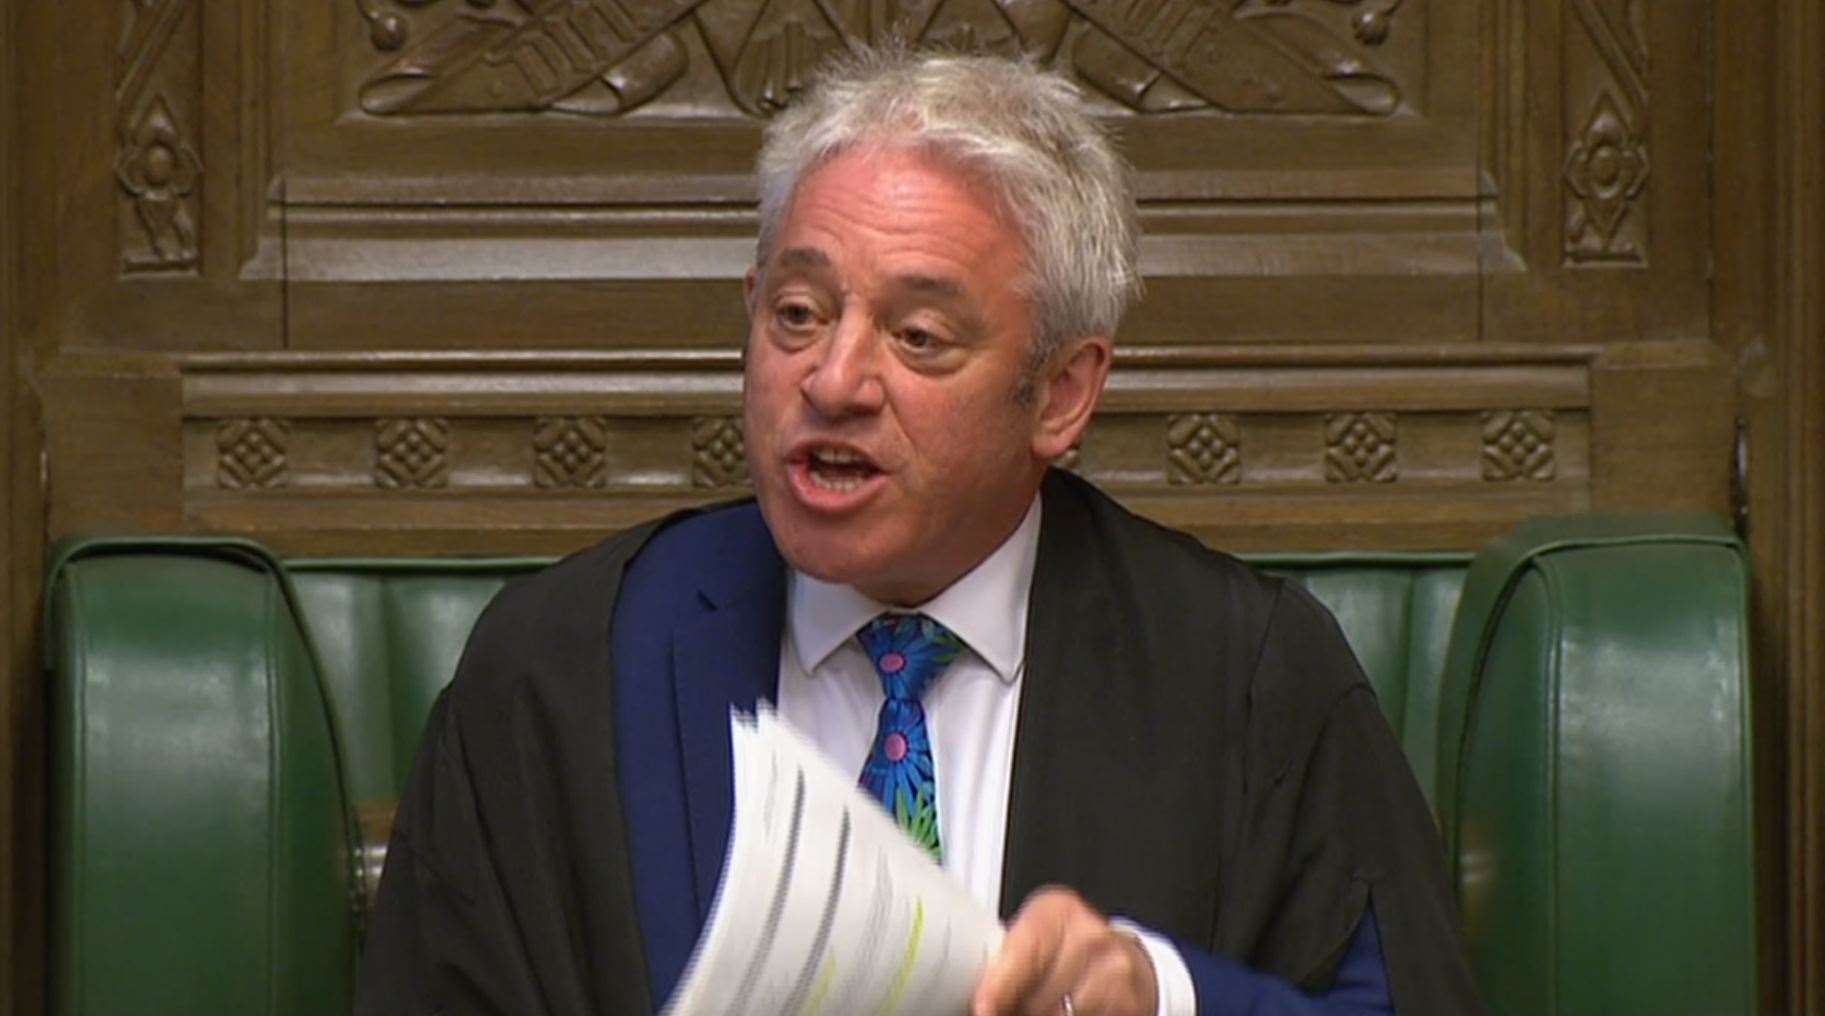 Ex-Speaker John Bercow during Prime Minister’s Questions (House of Commons)